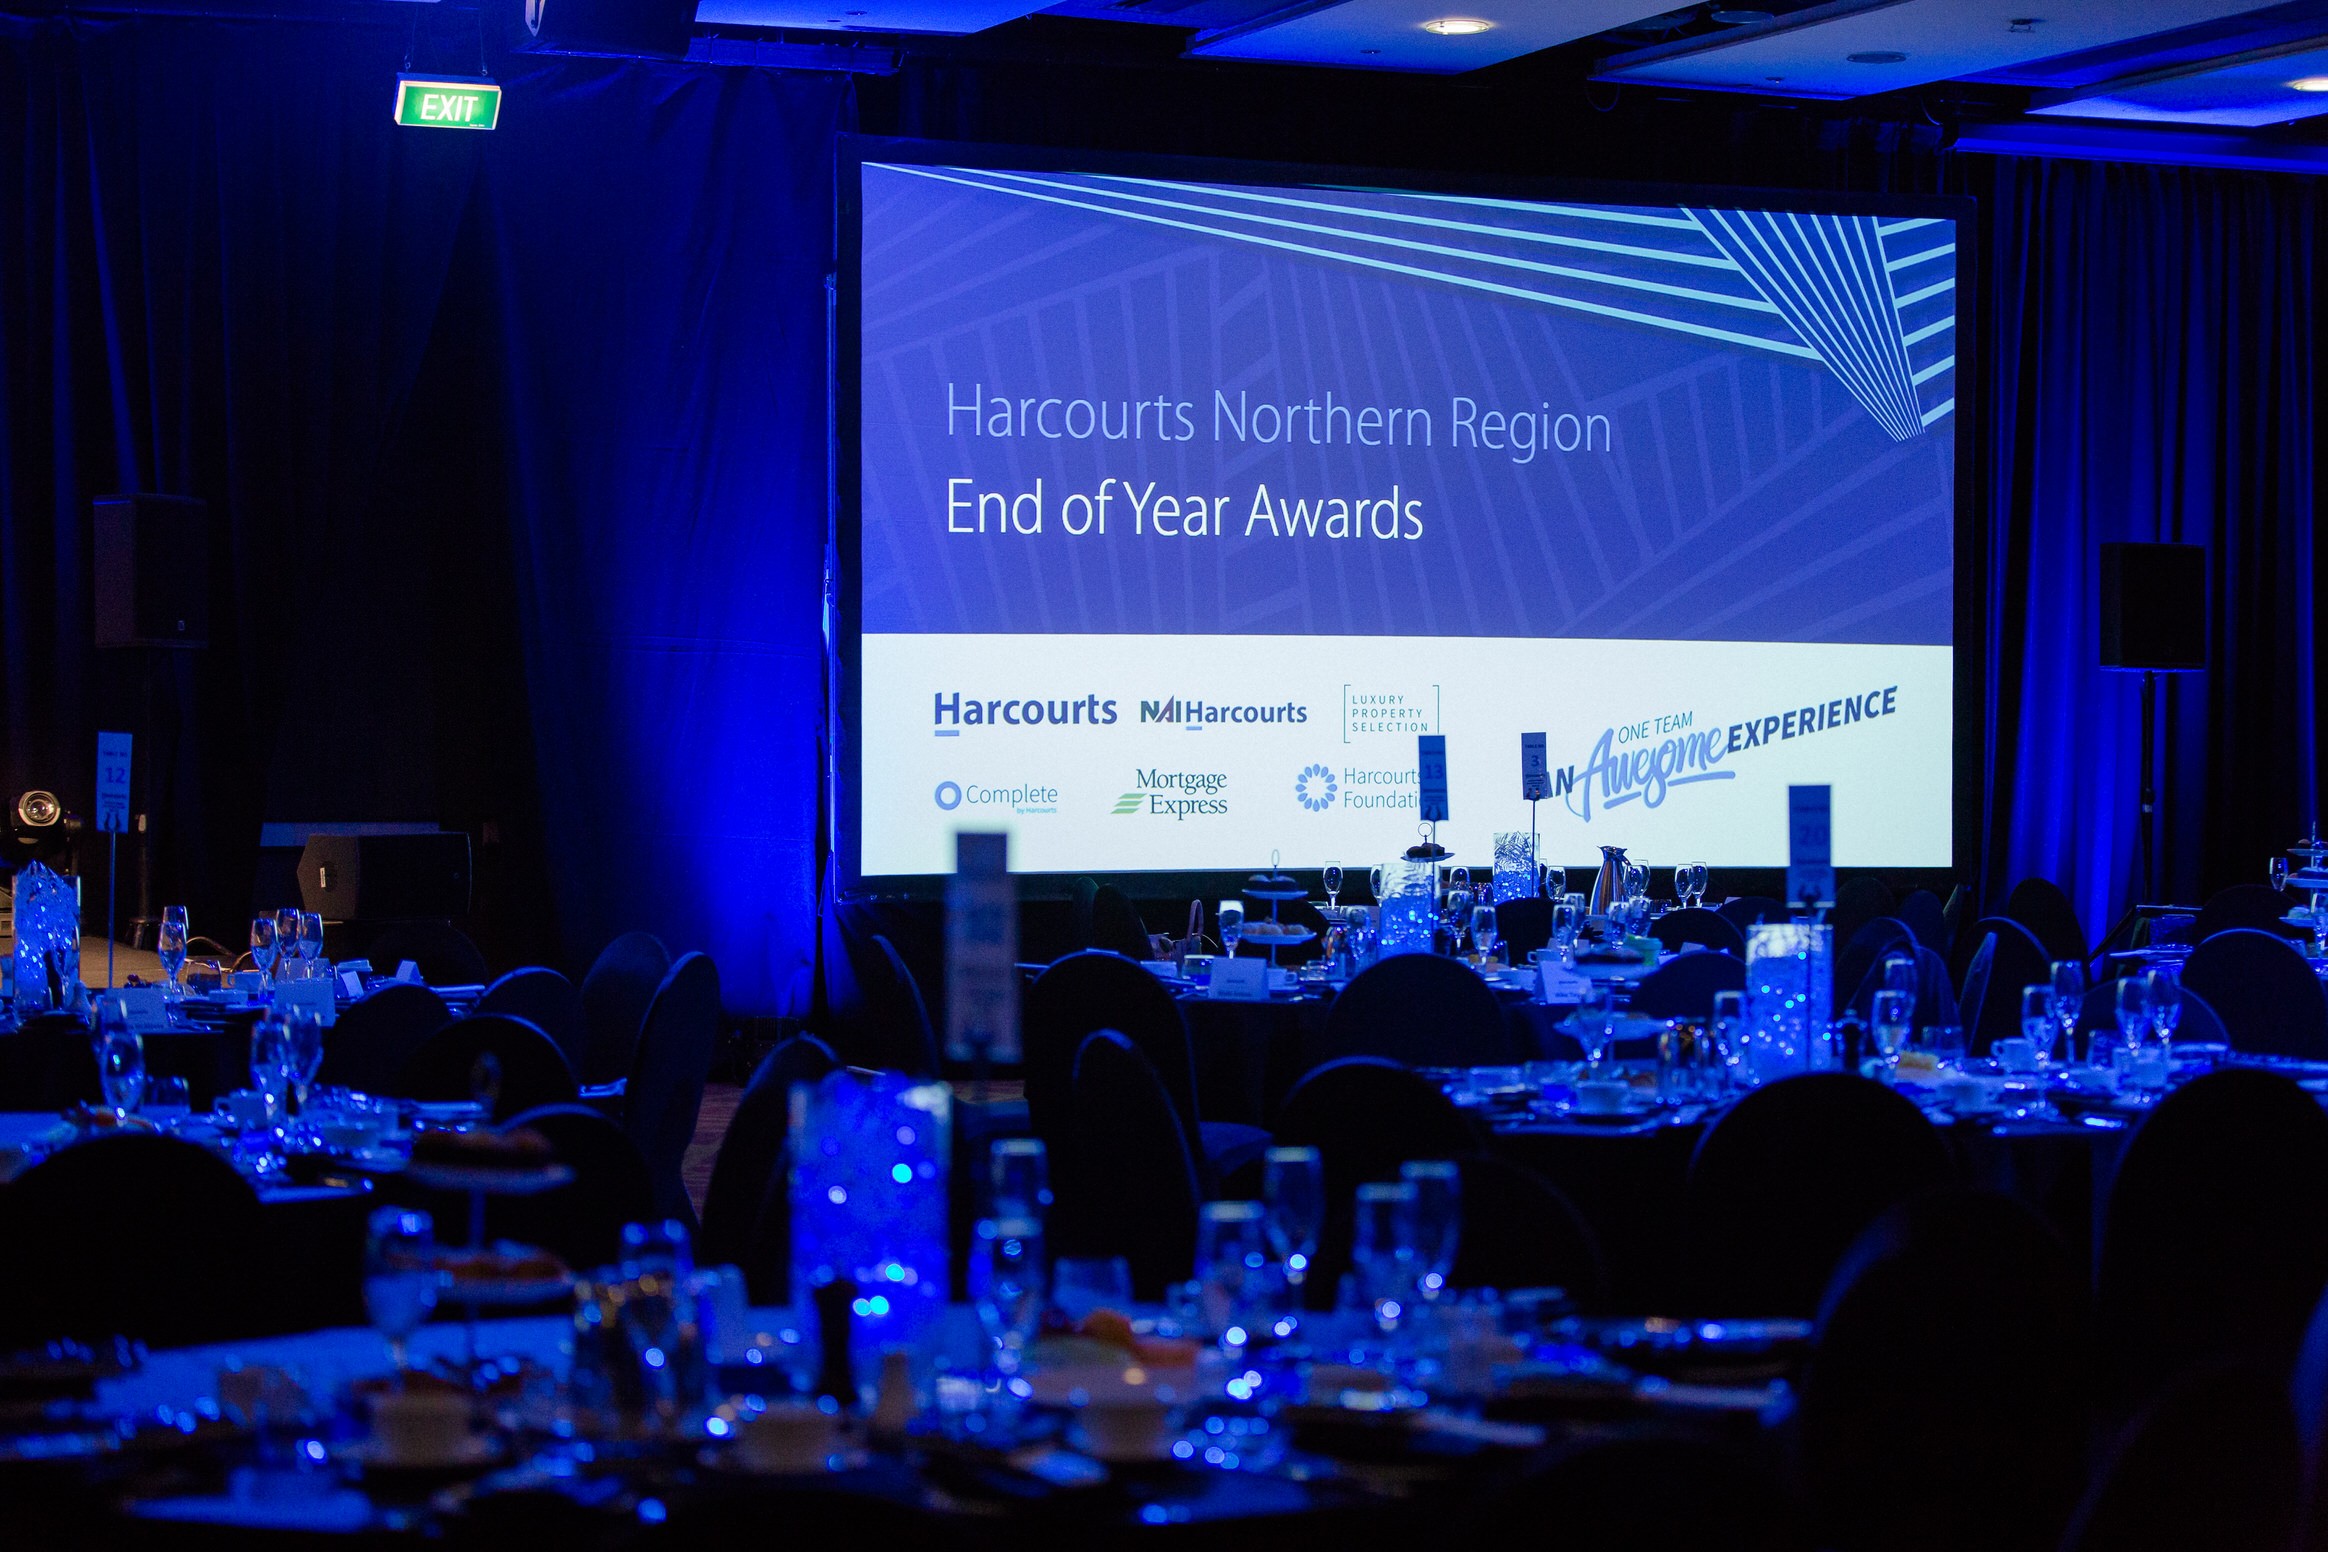 corporate, event, gala, dinner, awards, night, harcourts, auckland